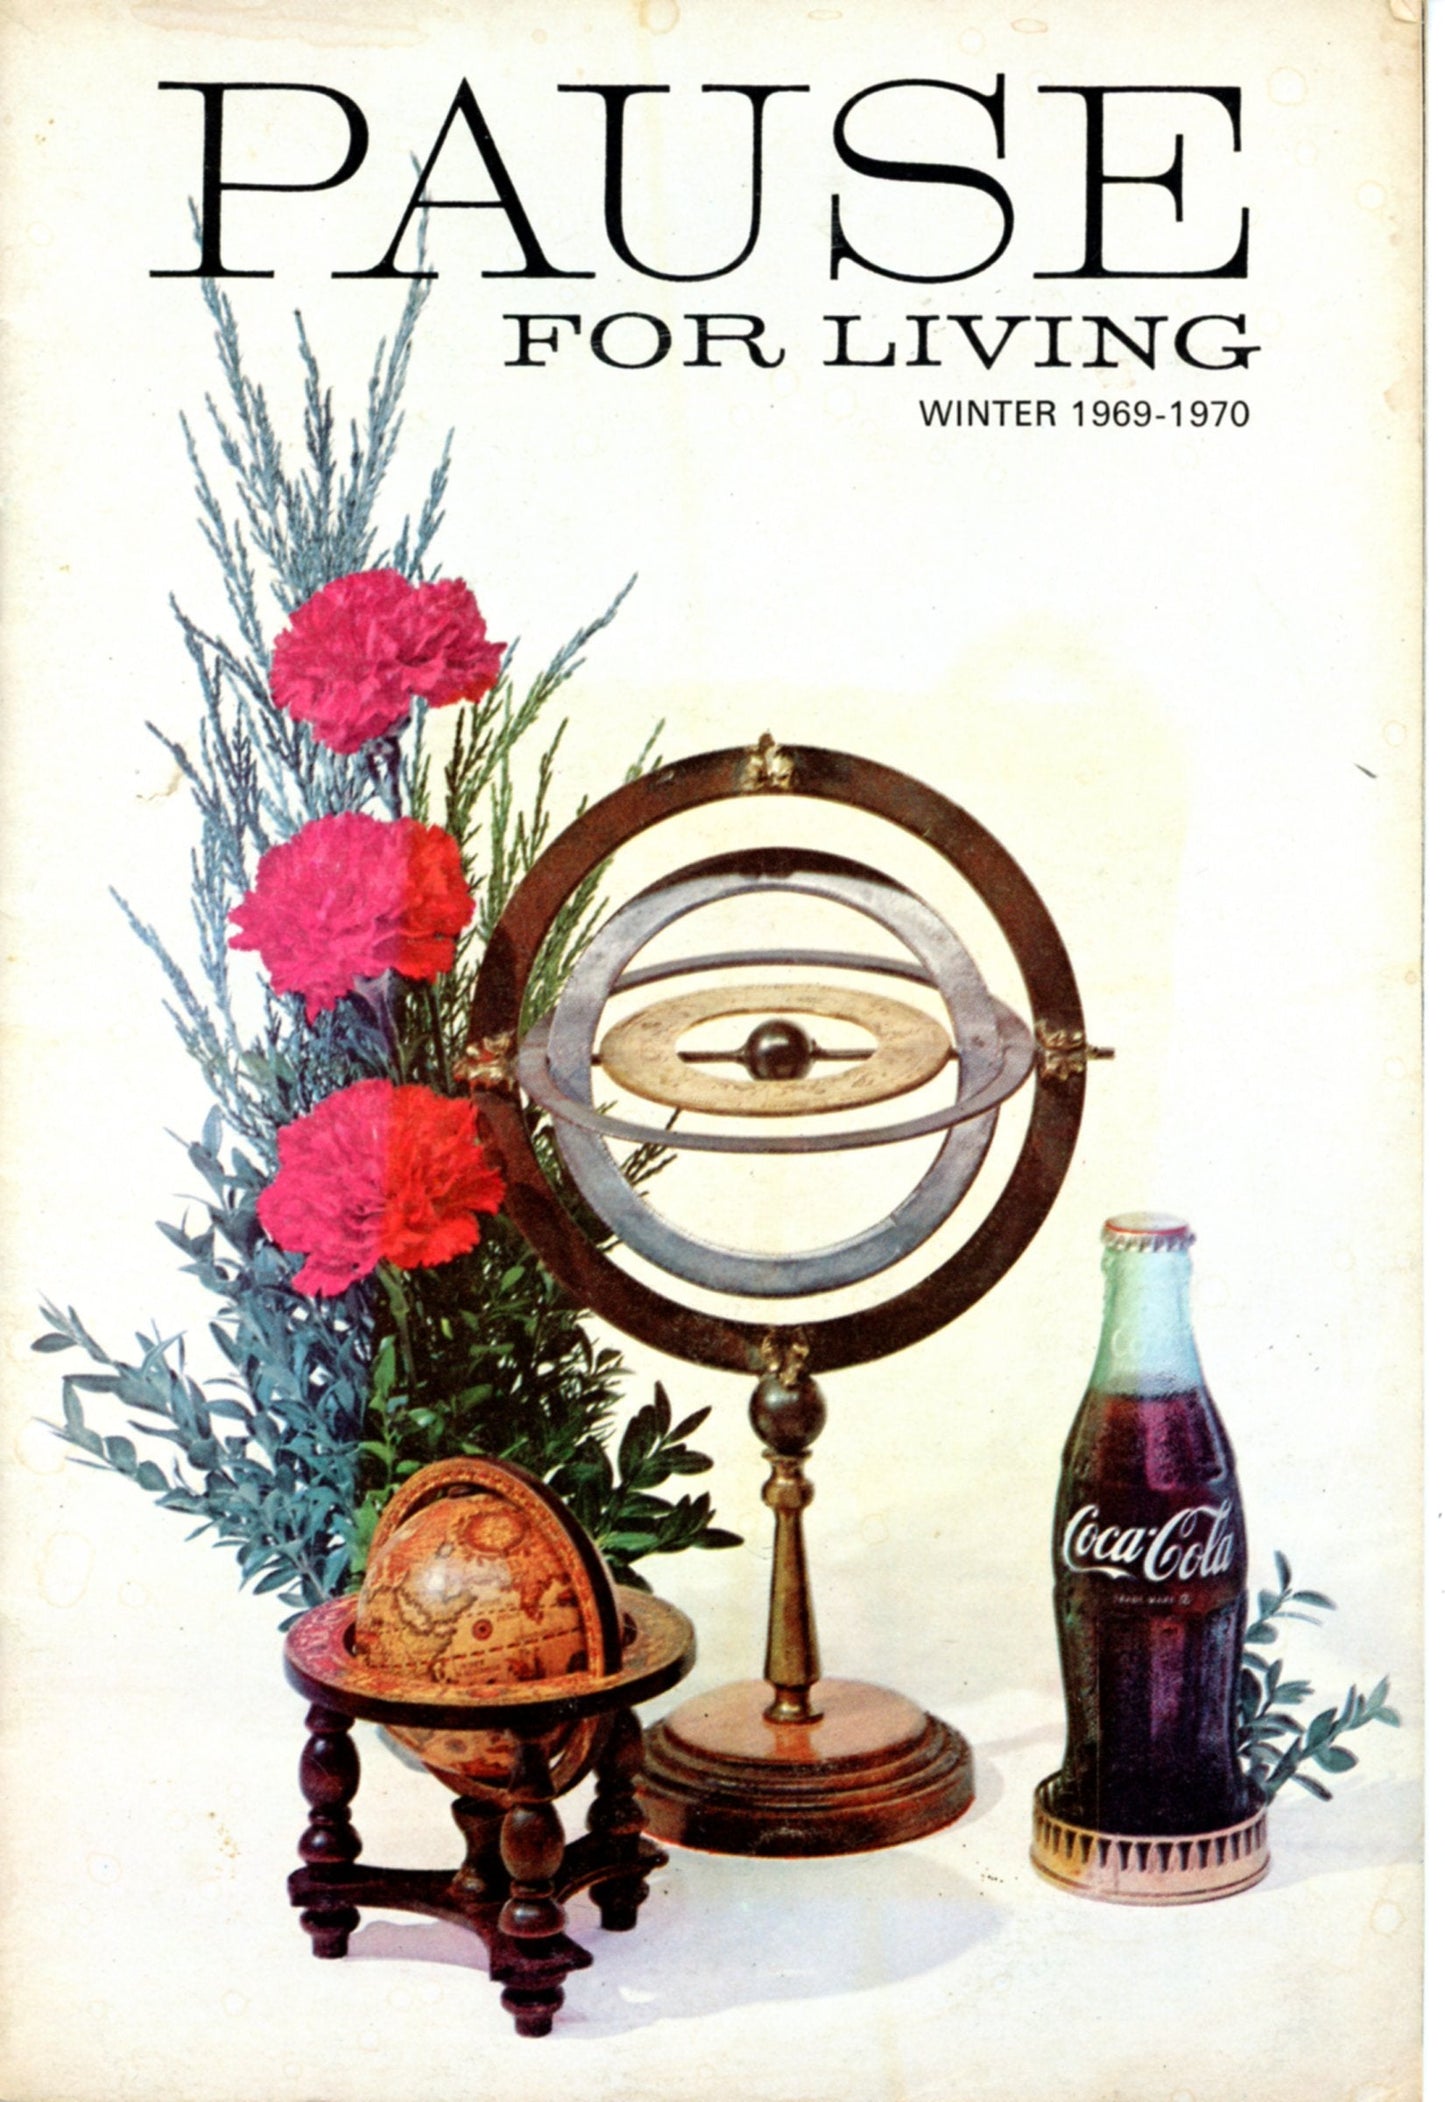 PAUSE FOR LIVING Coca Cola *Farewell* Issue Includes Letter Insert from James Williams | 1969-70 Issue | Vol. 16 No. 2